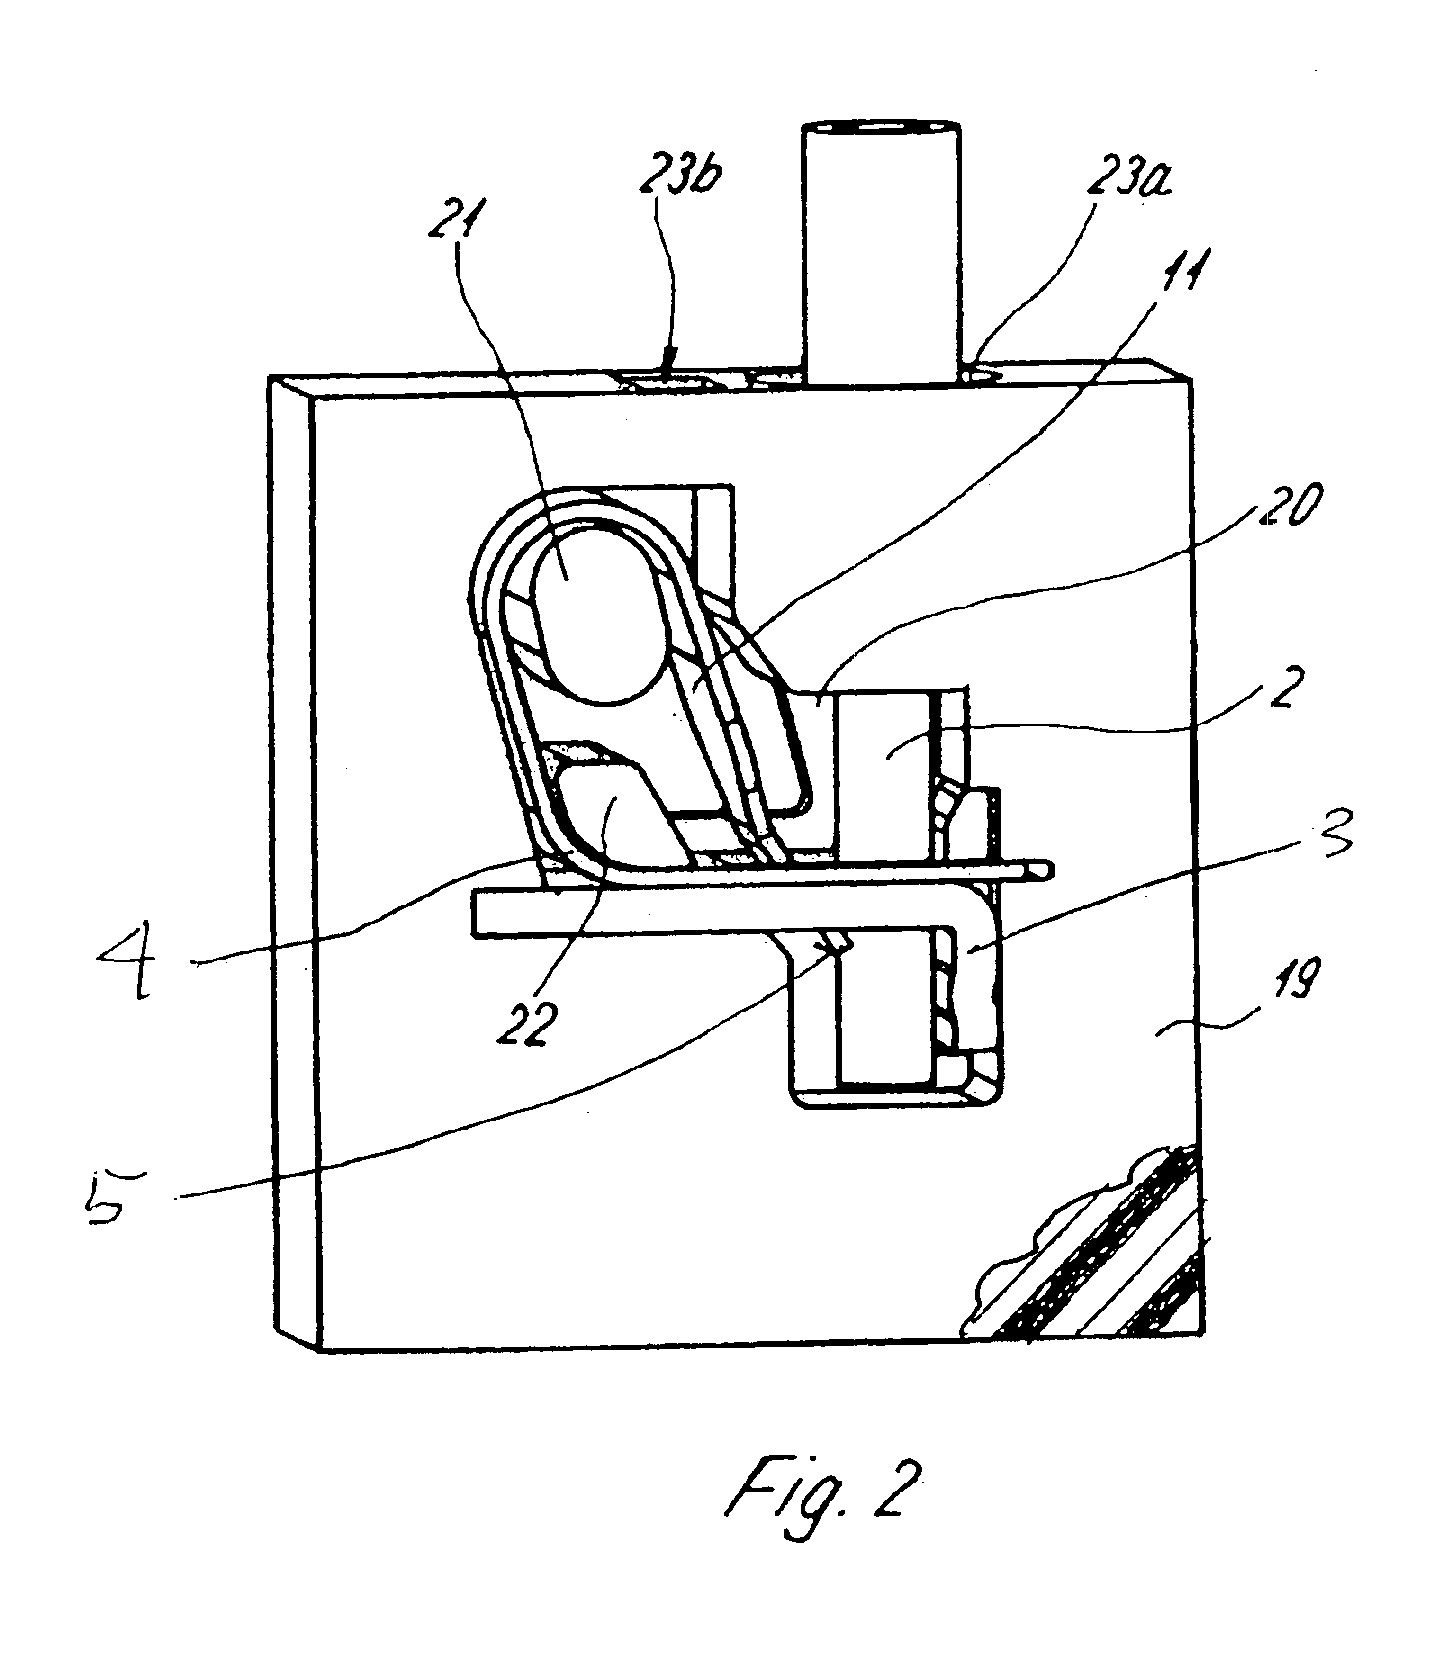 Connector apparatus adapted for the direct plug-in connection of conductors